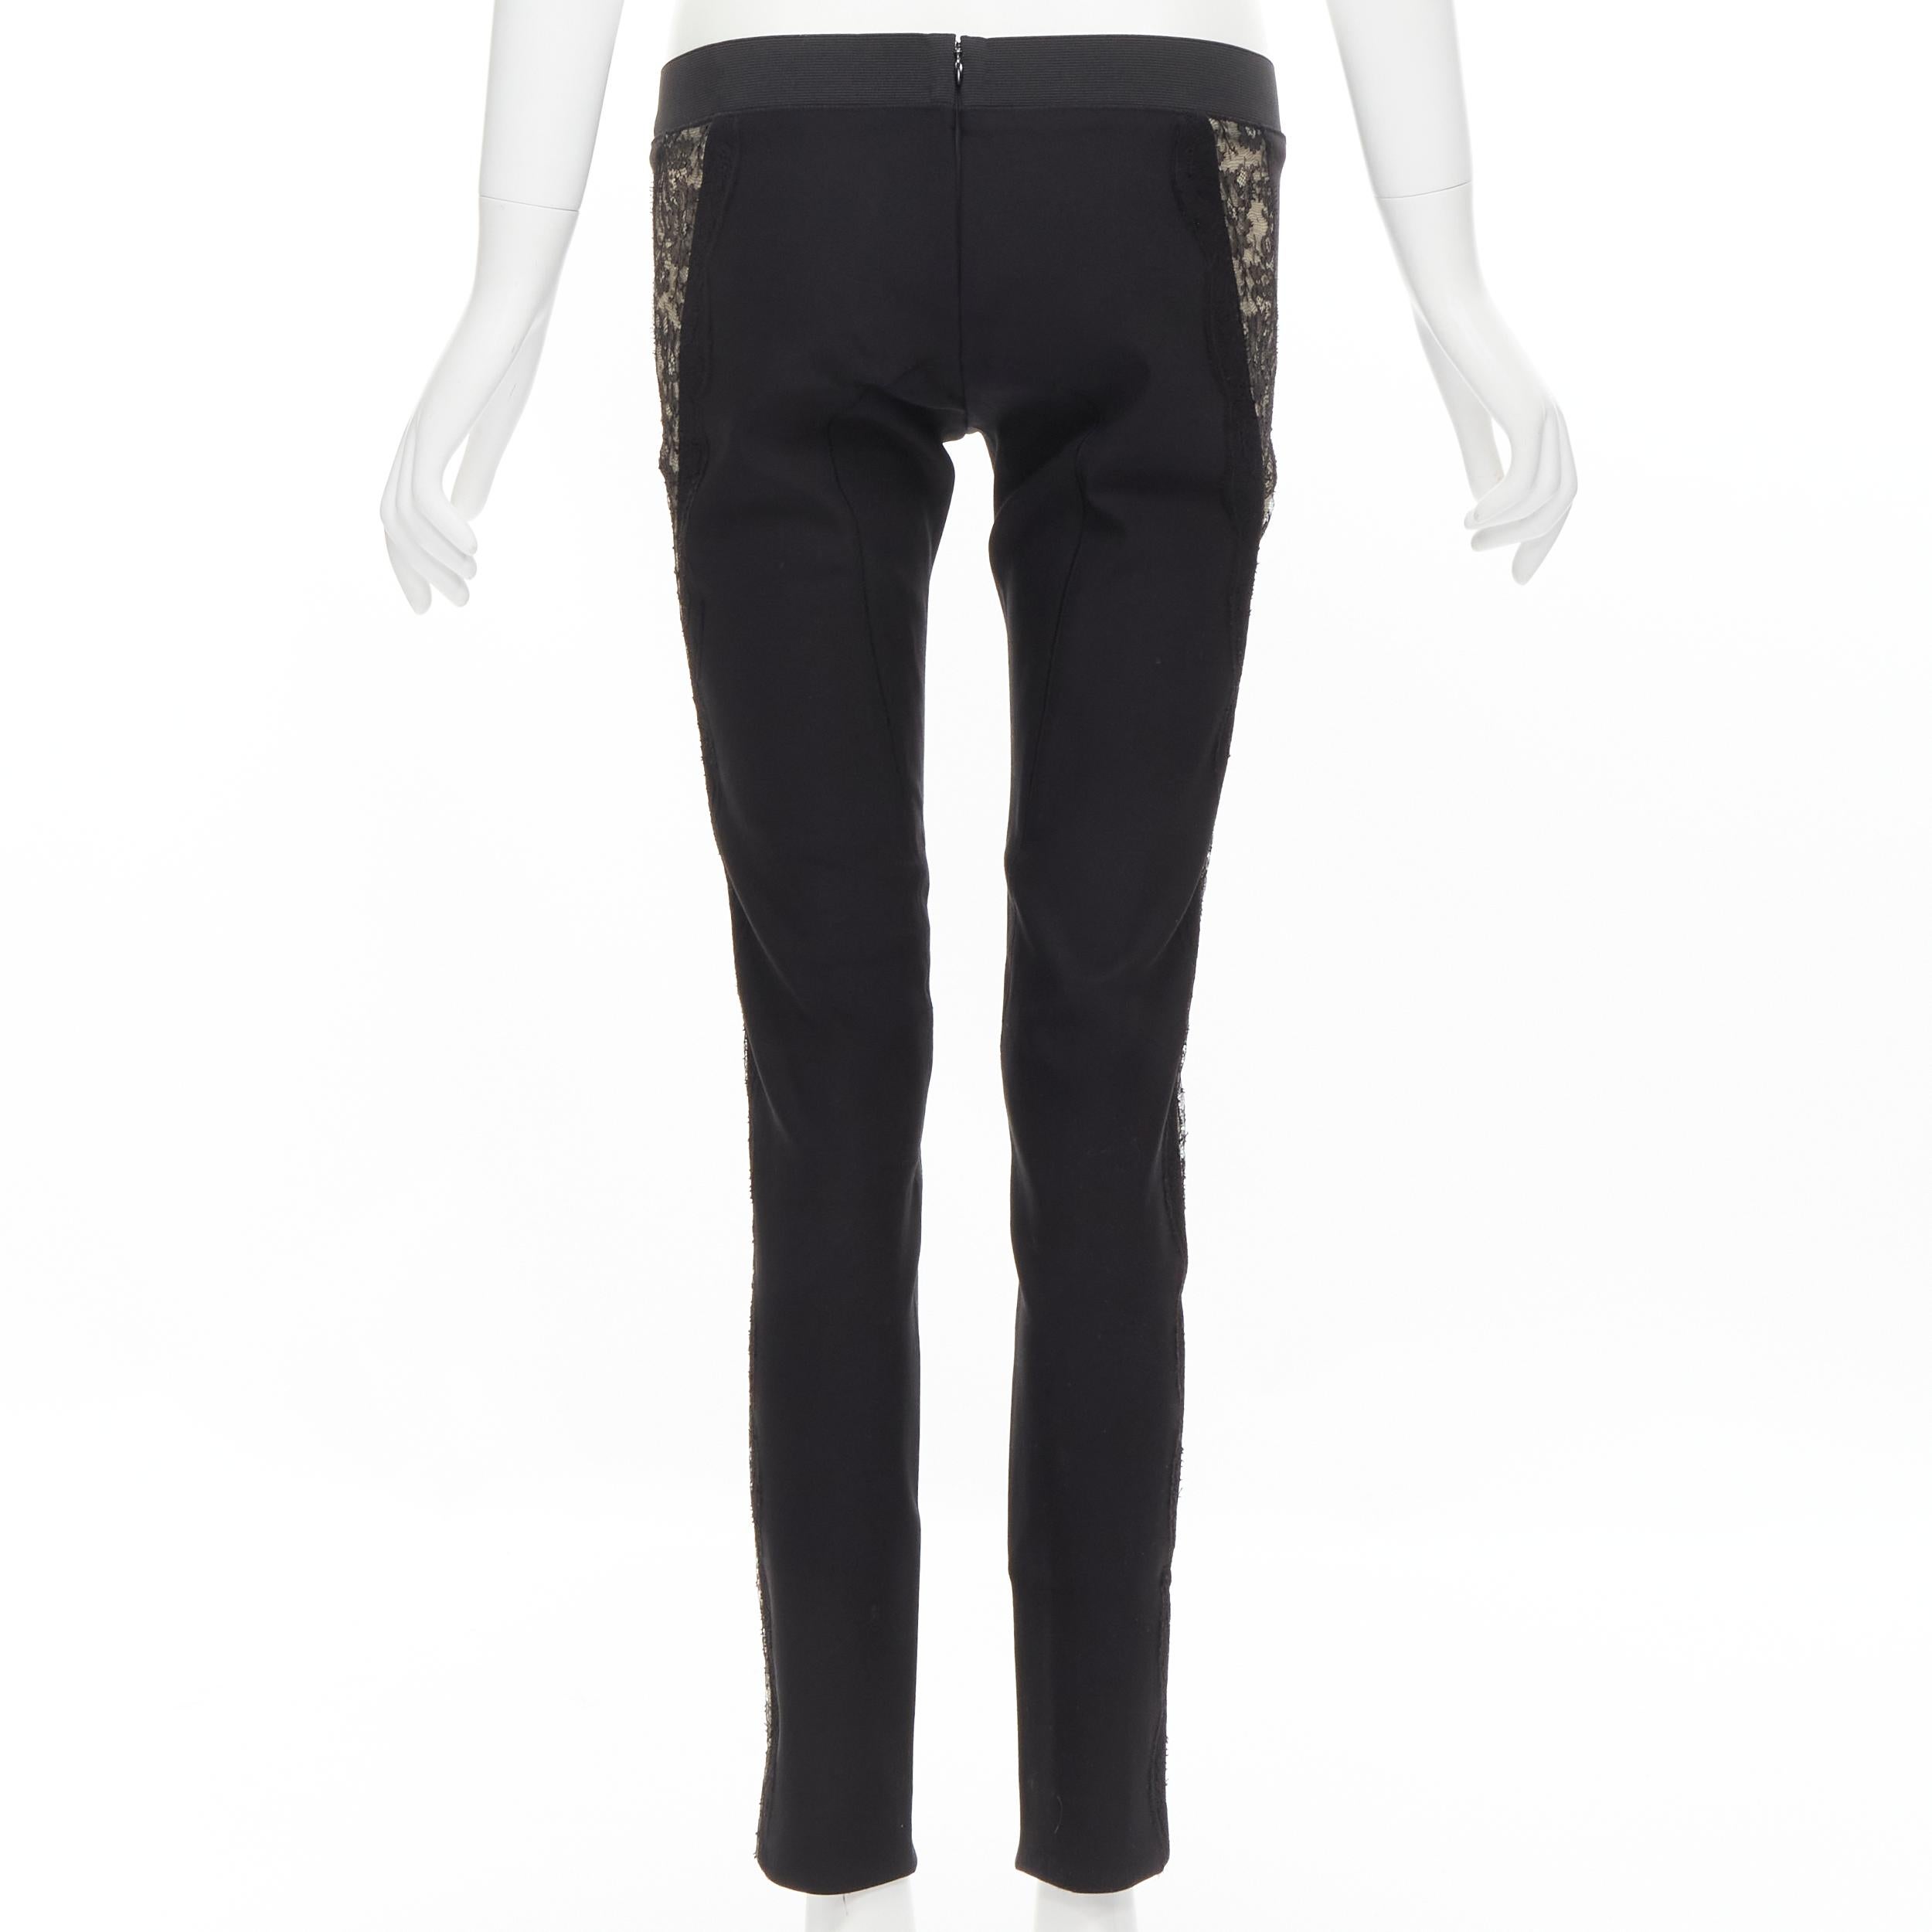 STELLA MCCARTNEY black contour seam sheer lace side stretch legging pants IT38 S In Excellent Condition For Sale In Hong Kong, NT